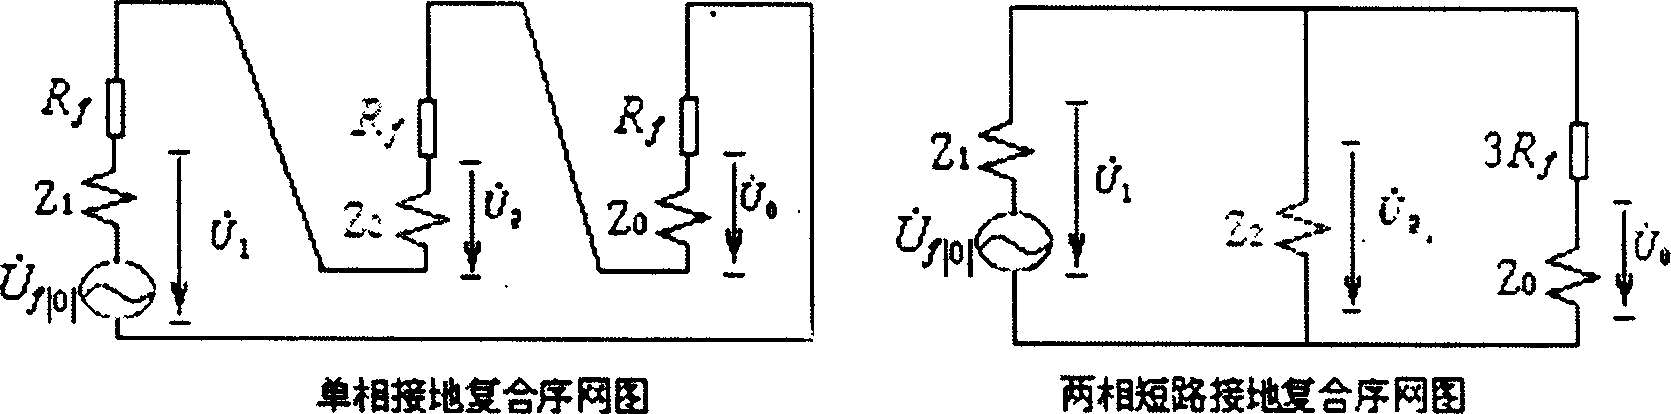 High voltage circuit phase selection based on pallern identification